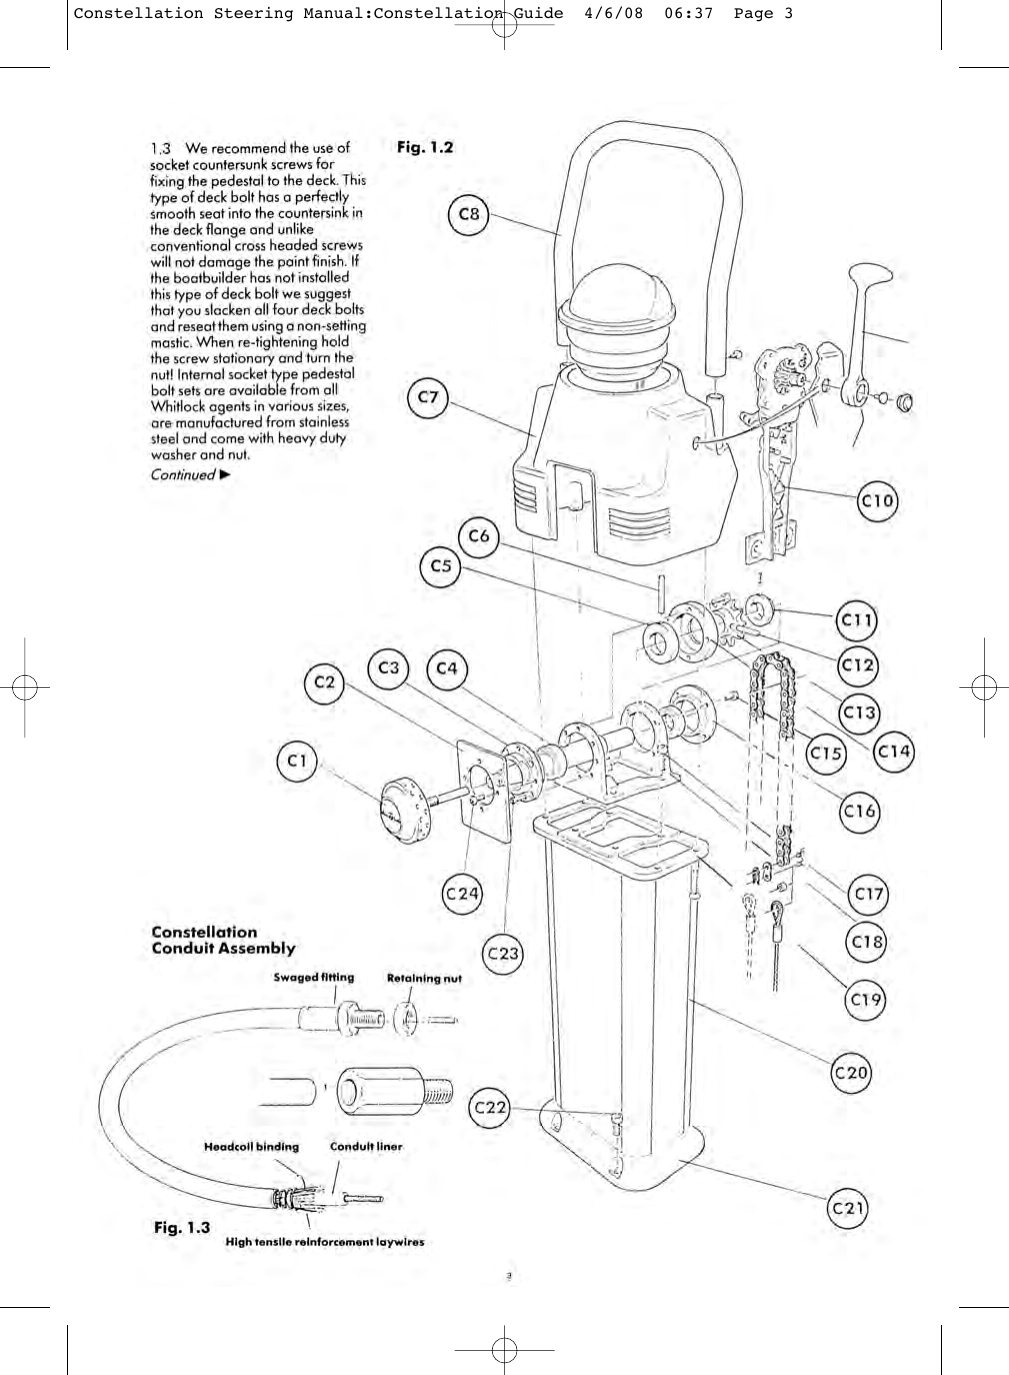 Page 3 of 8 - Constellation Steering Manual:Constellation Guide Constellation-Steering-Manual